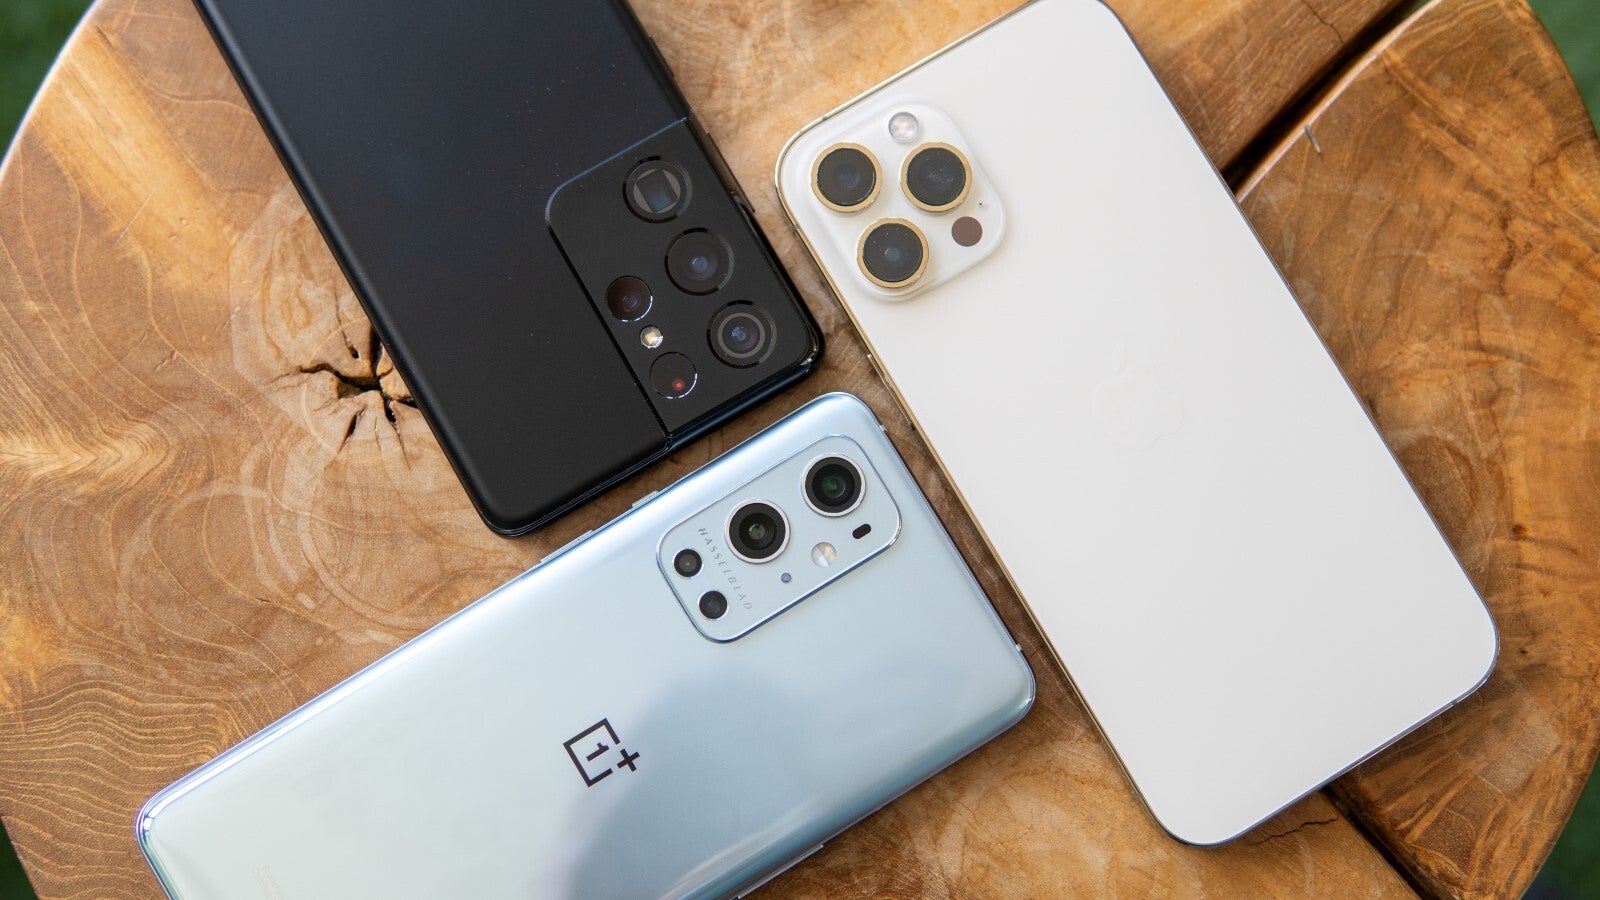 OnePlus 9 Pro vs iPhone 12 Pro Max: has OnePlus made the ultimate "flagship killer"?